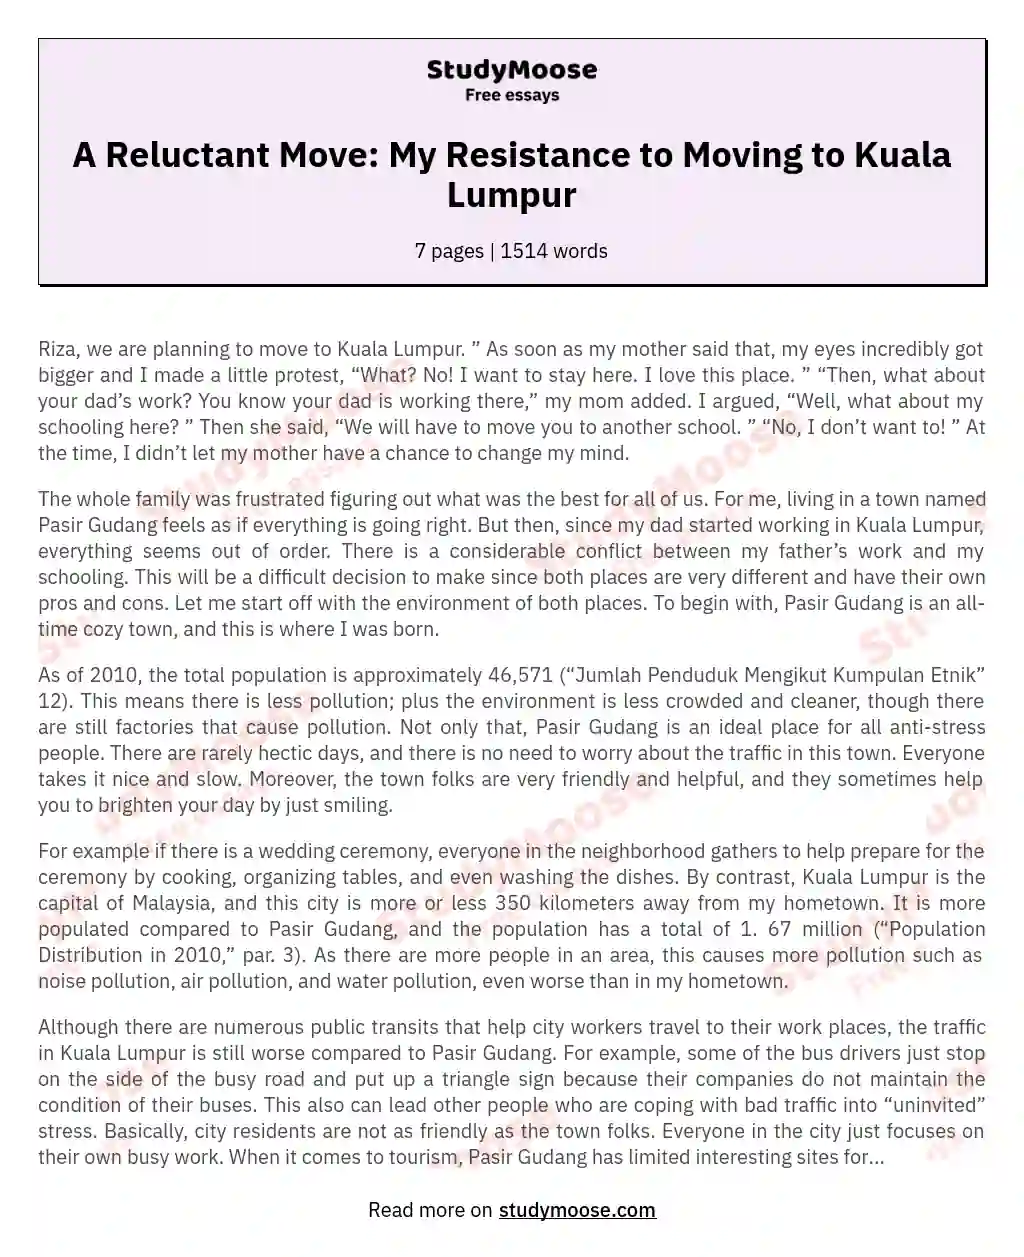 A Reluctant Move: My Resistance to Moving to Kuala Lumpur essay